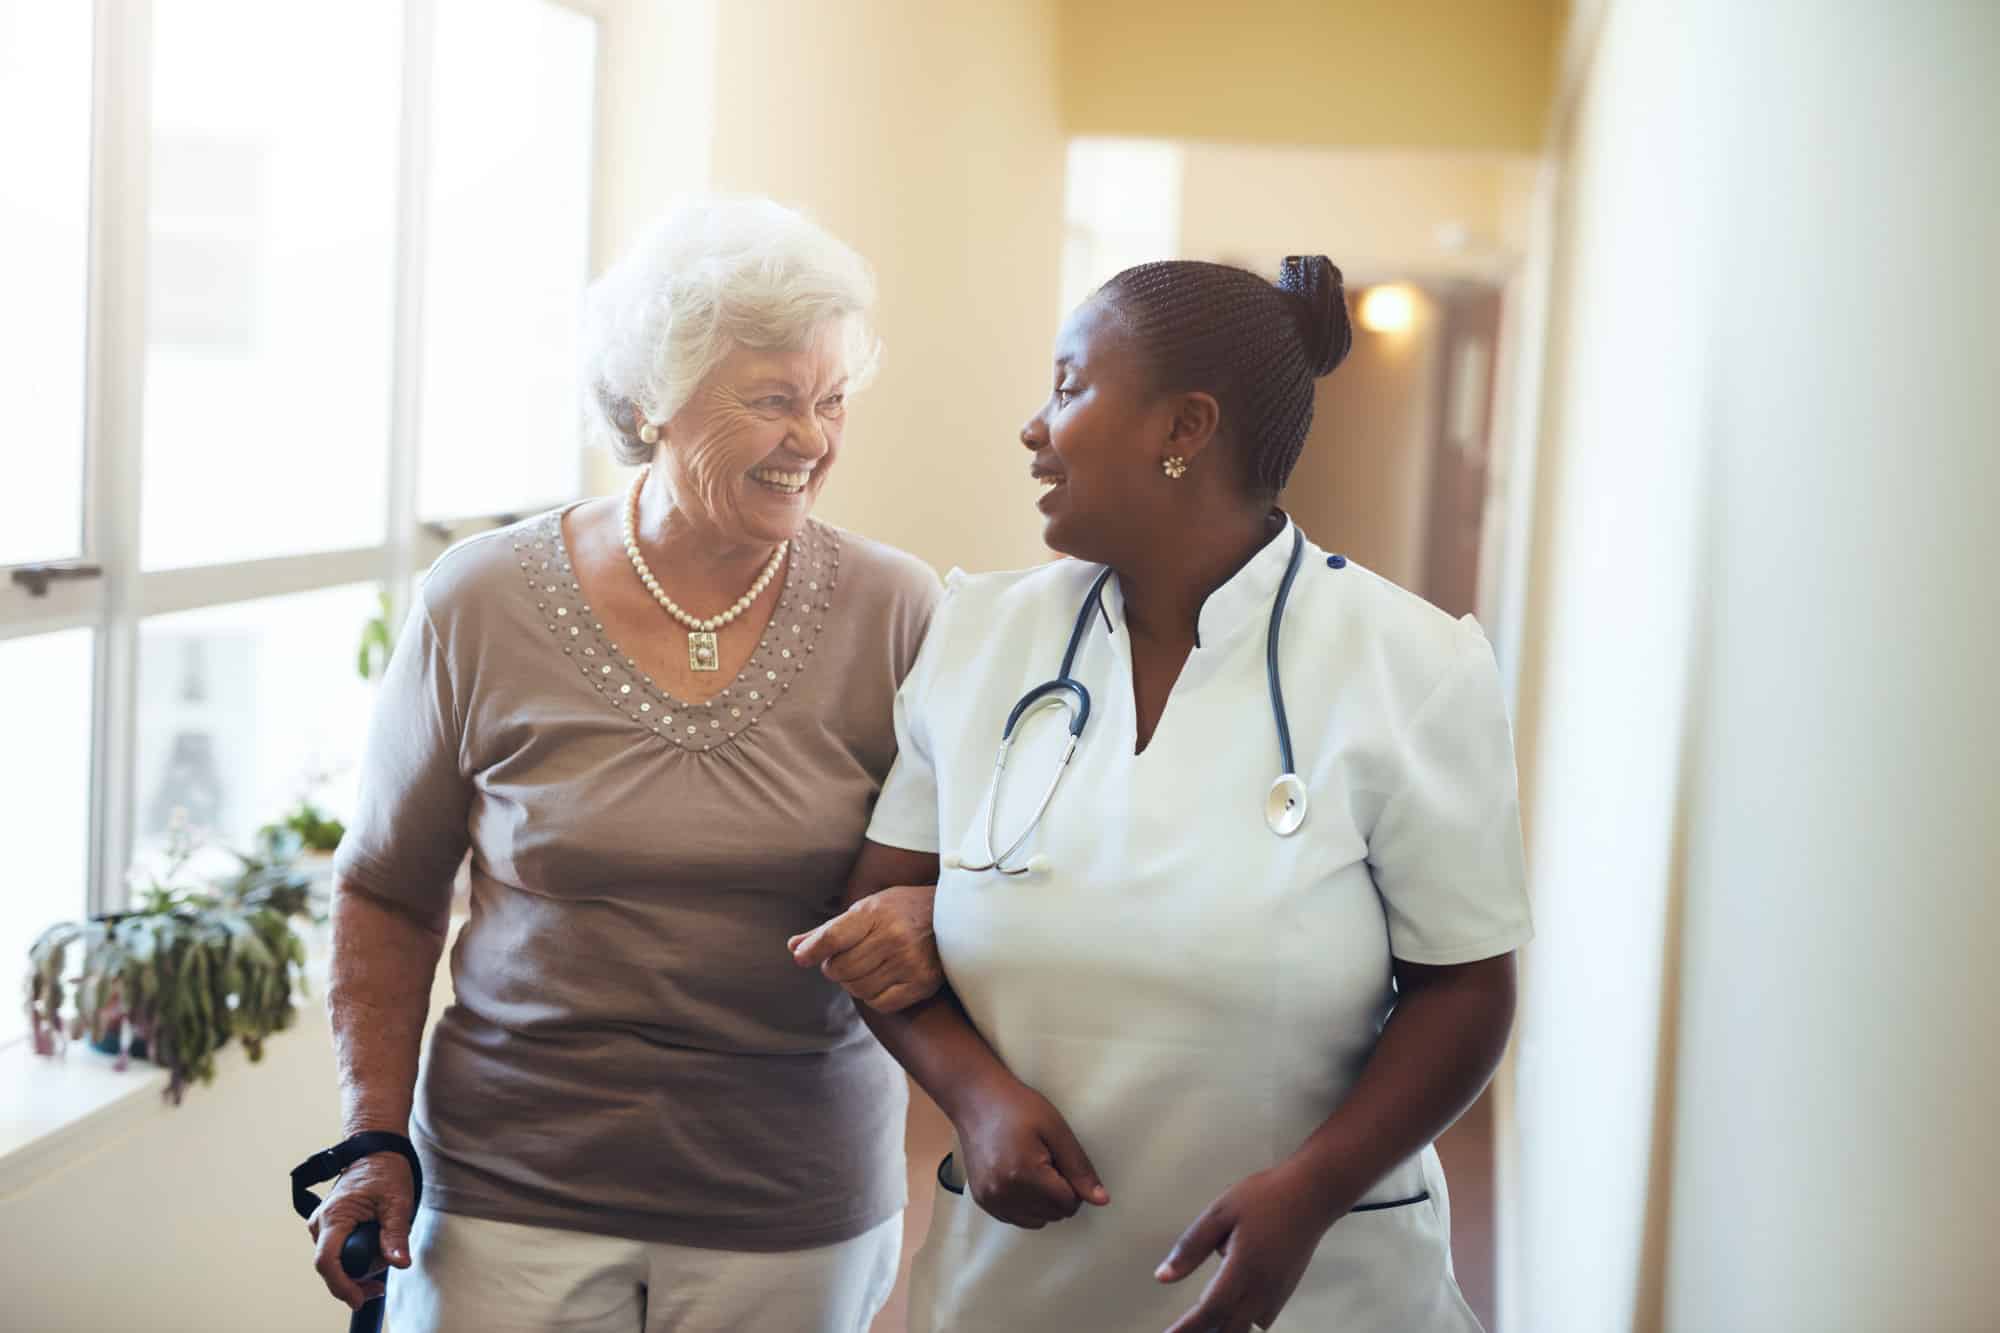 Medicaid vs Medicare: What Are the Differences for Elders?